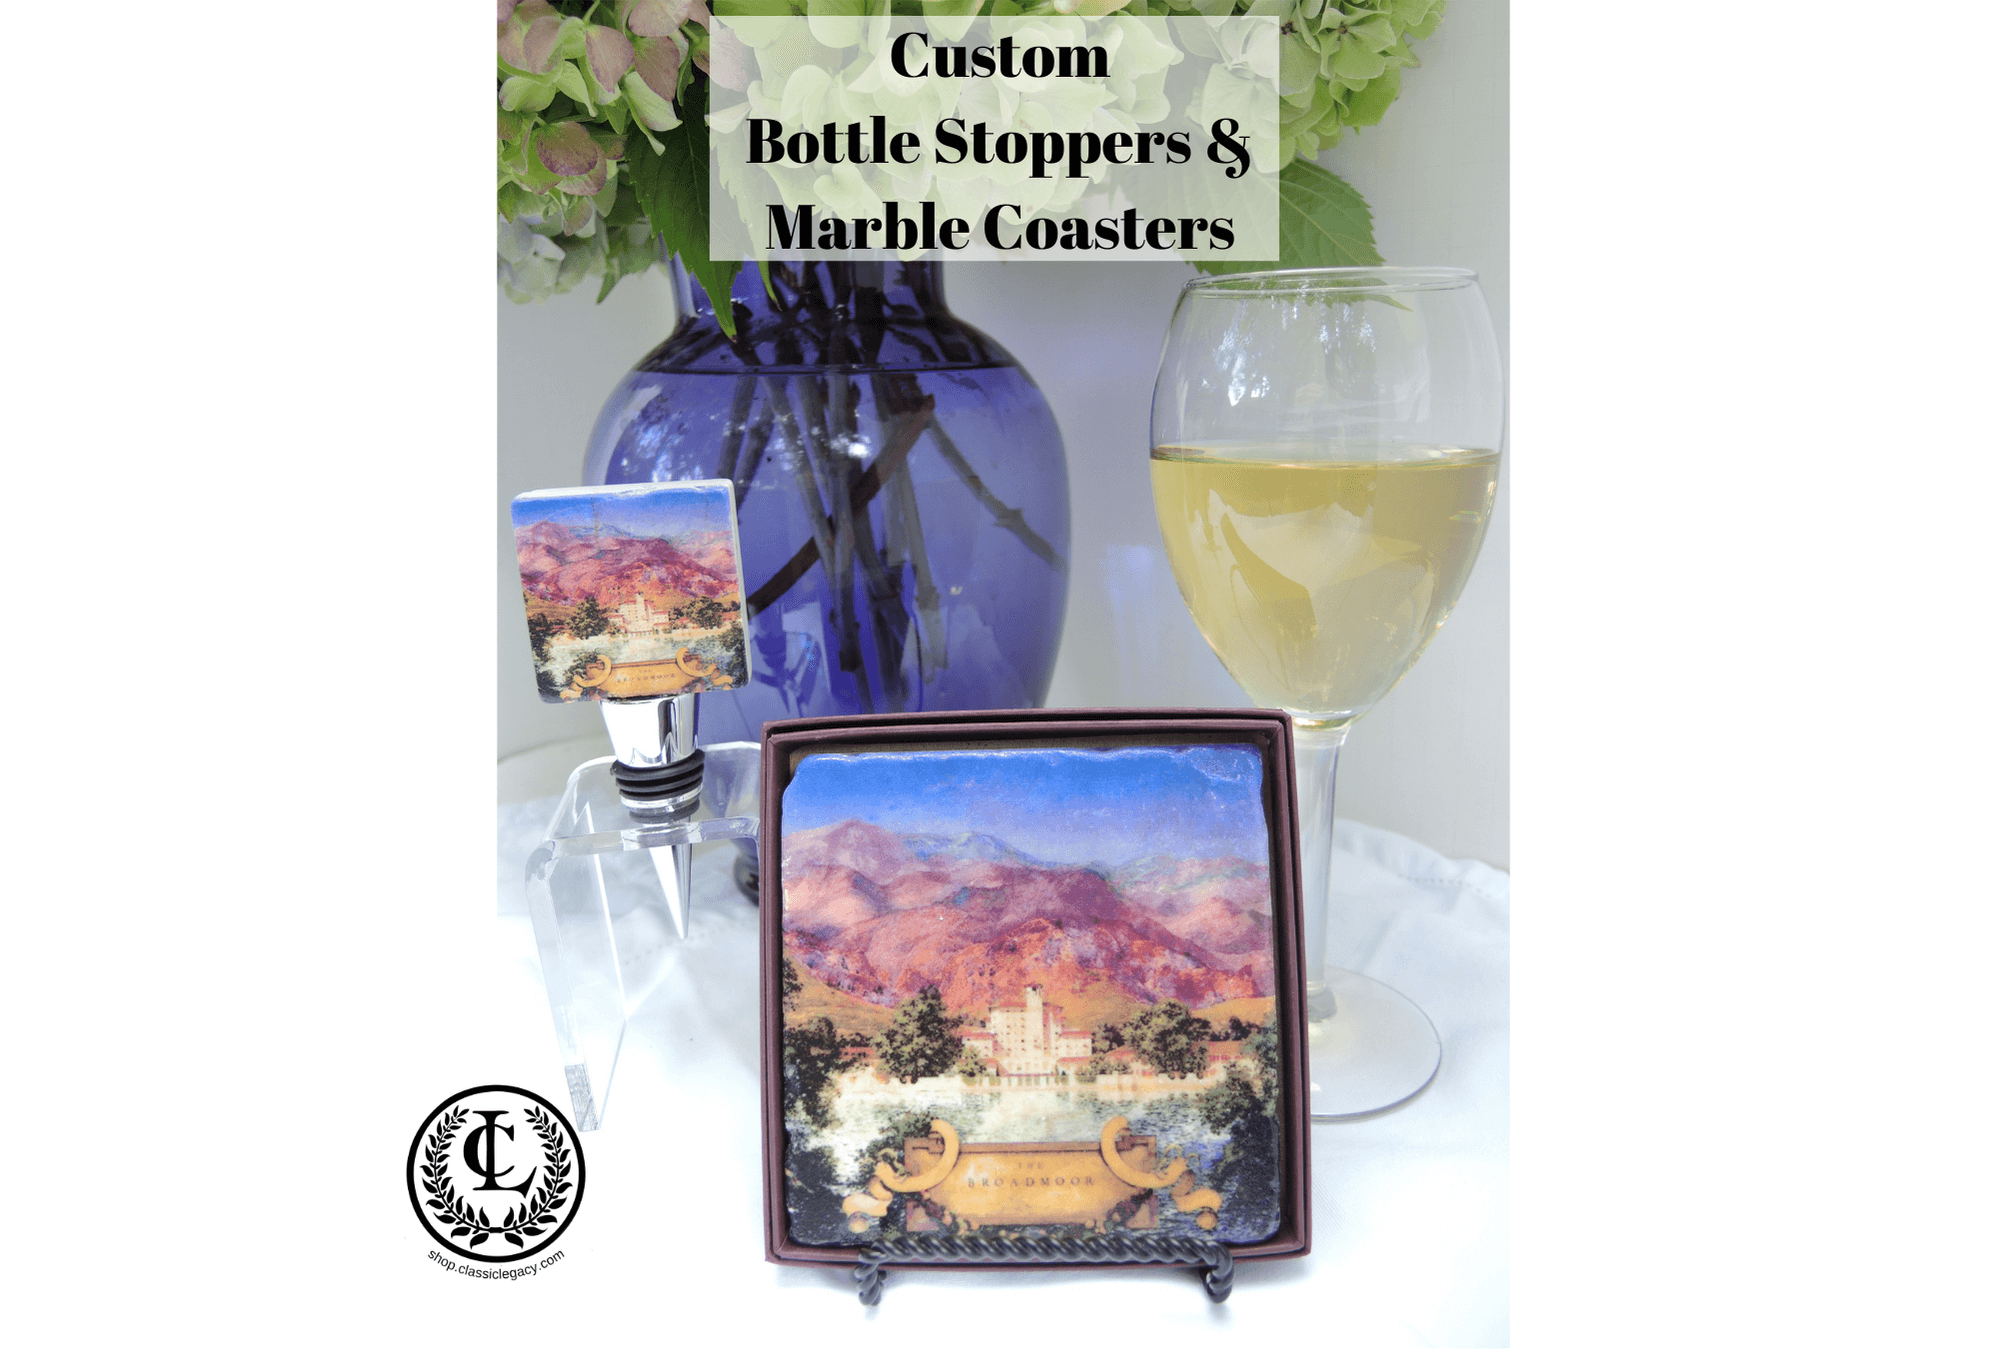 Custom marble bottle stopper and marble coaster with art image of The Broadmoor Hotel